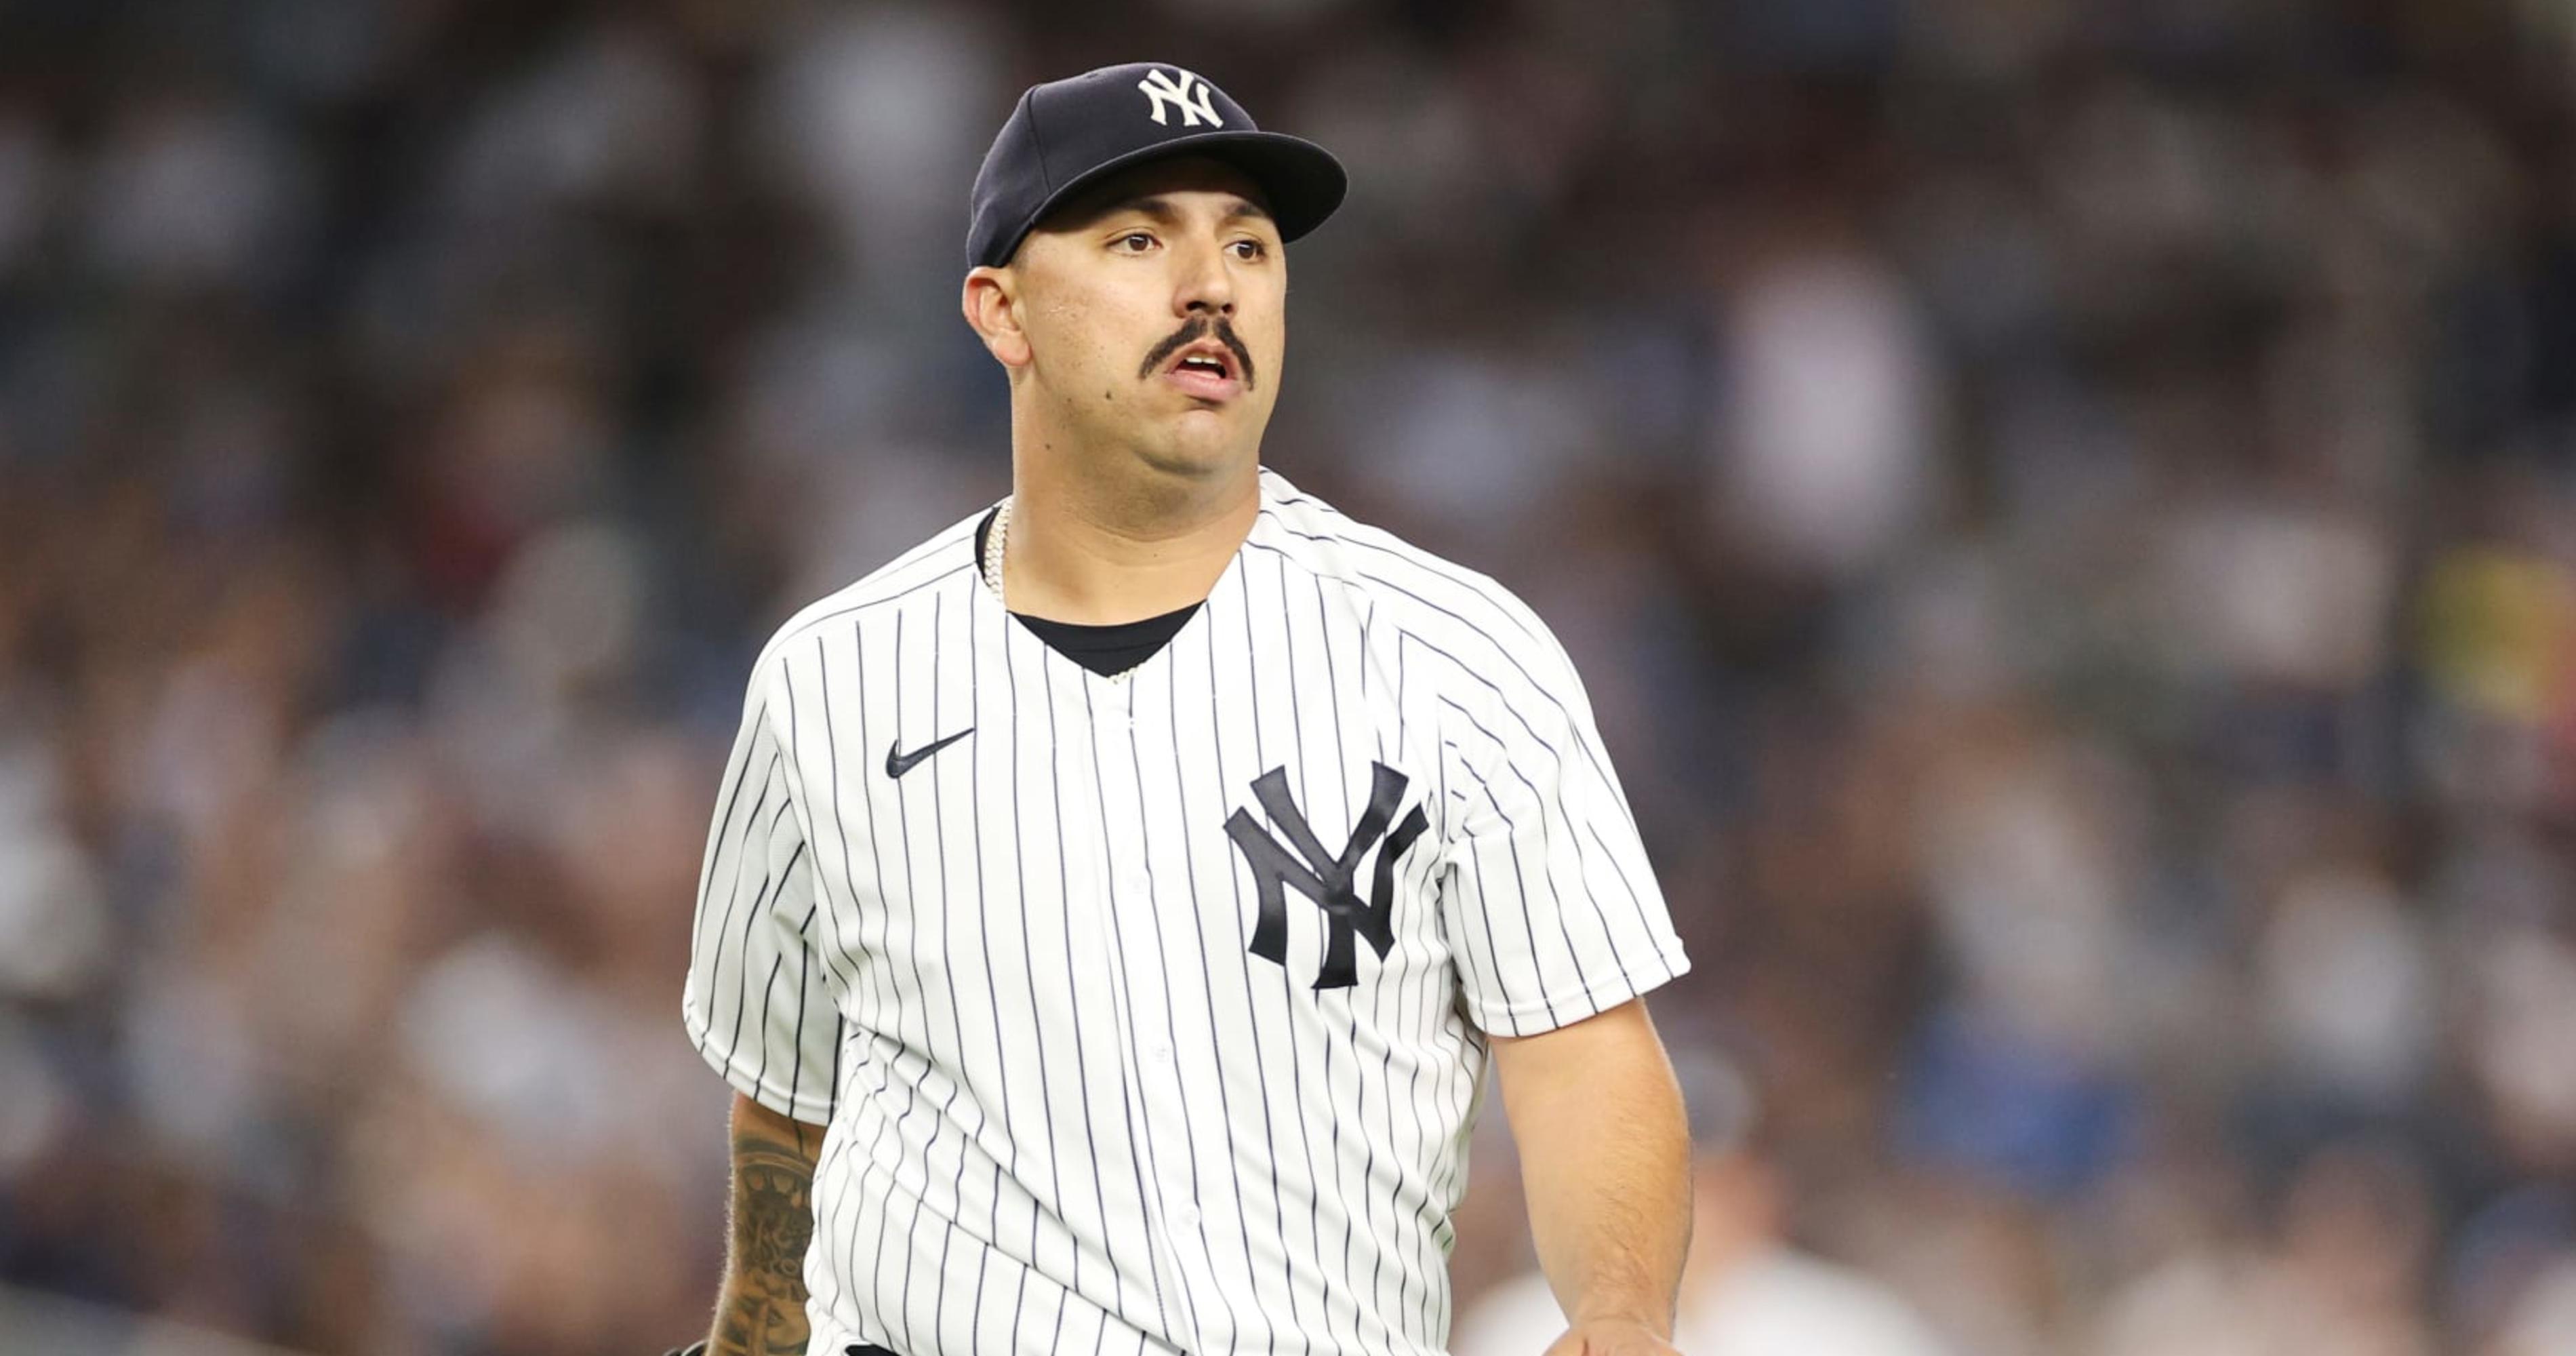 Yankees put All-Star Cortes on injured list for groin strain